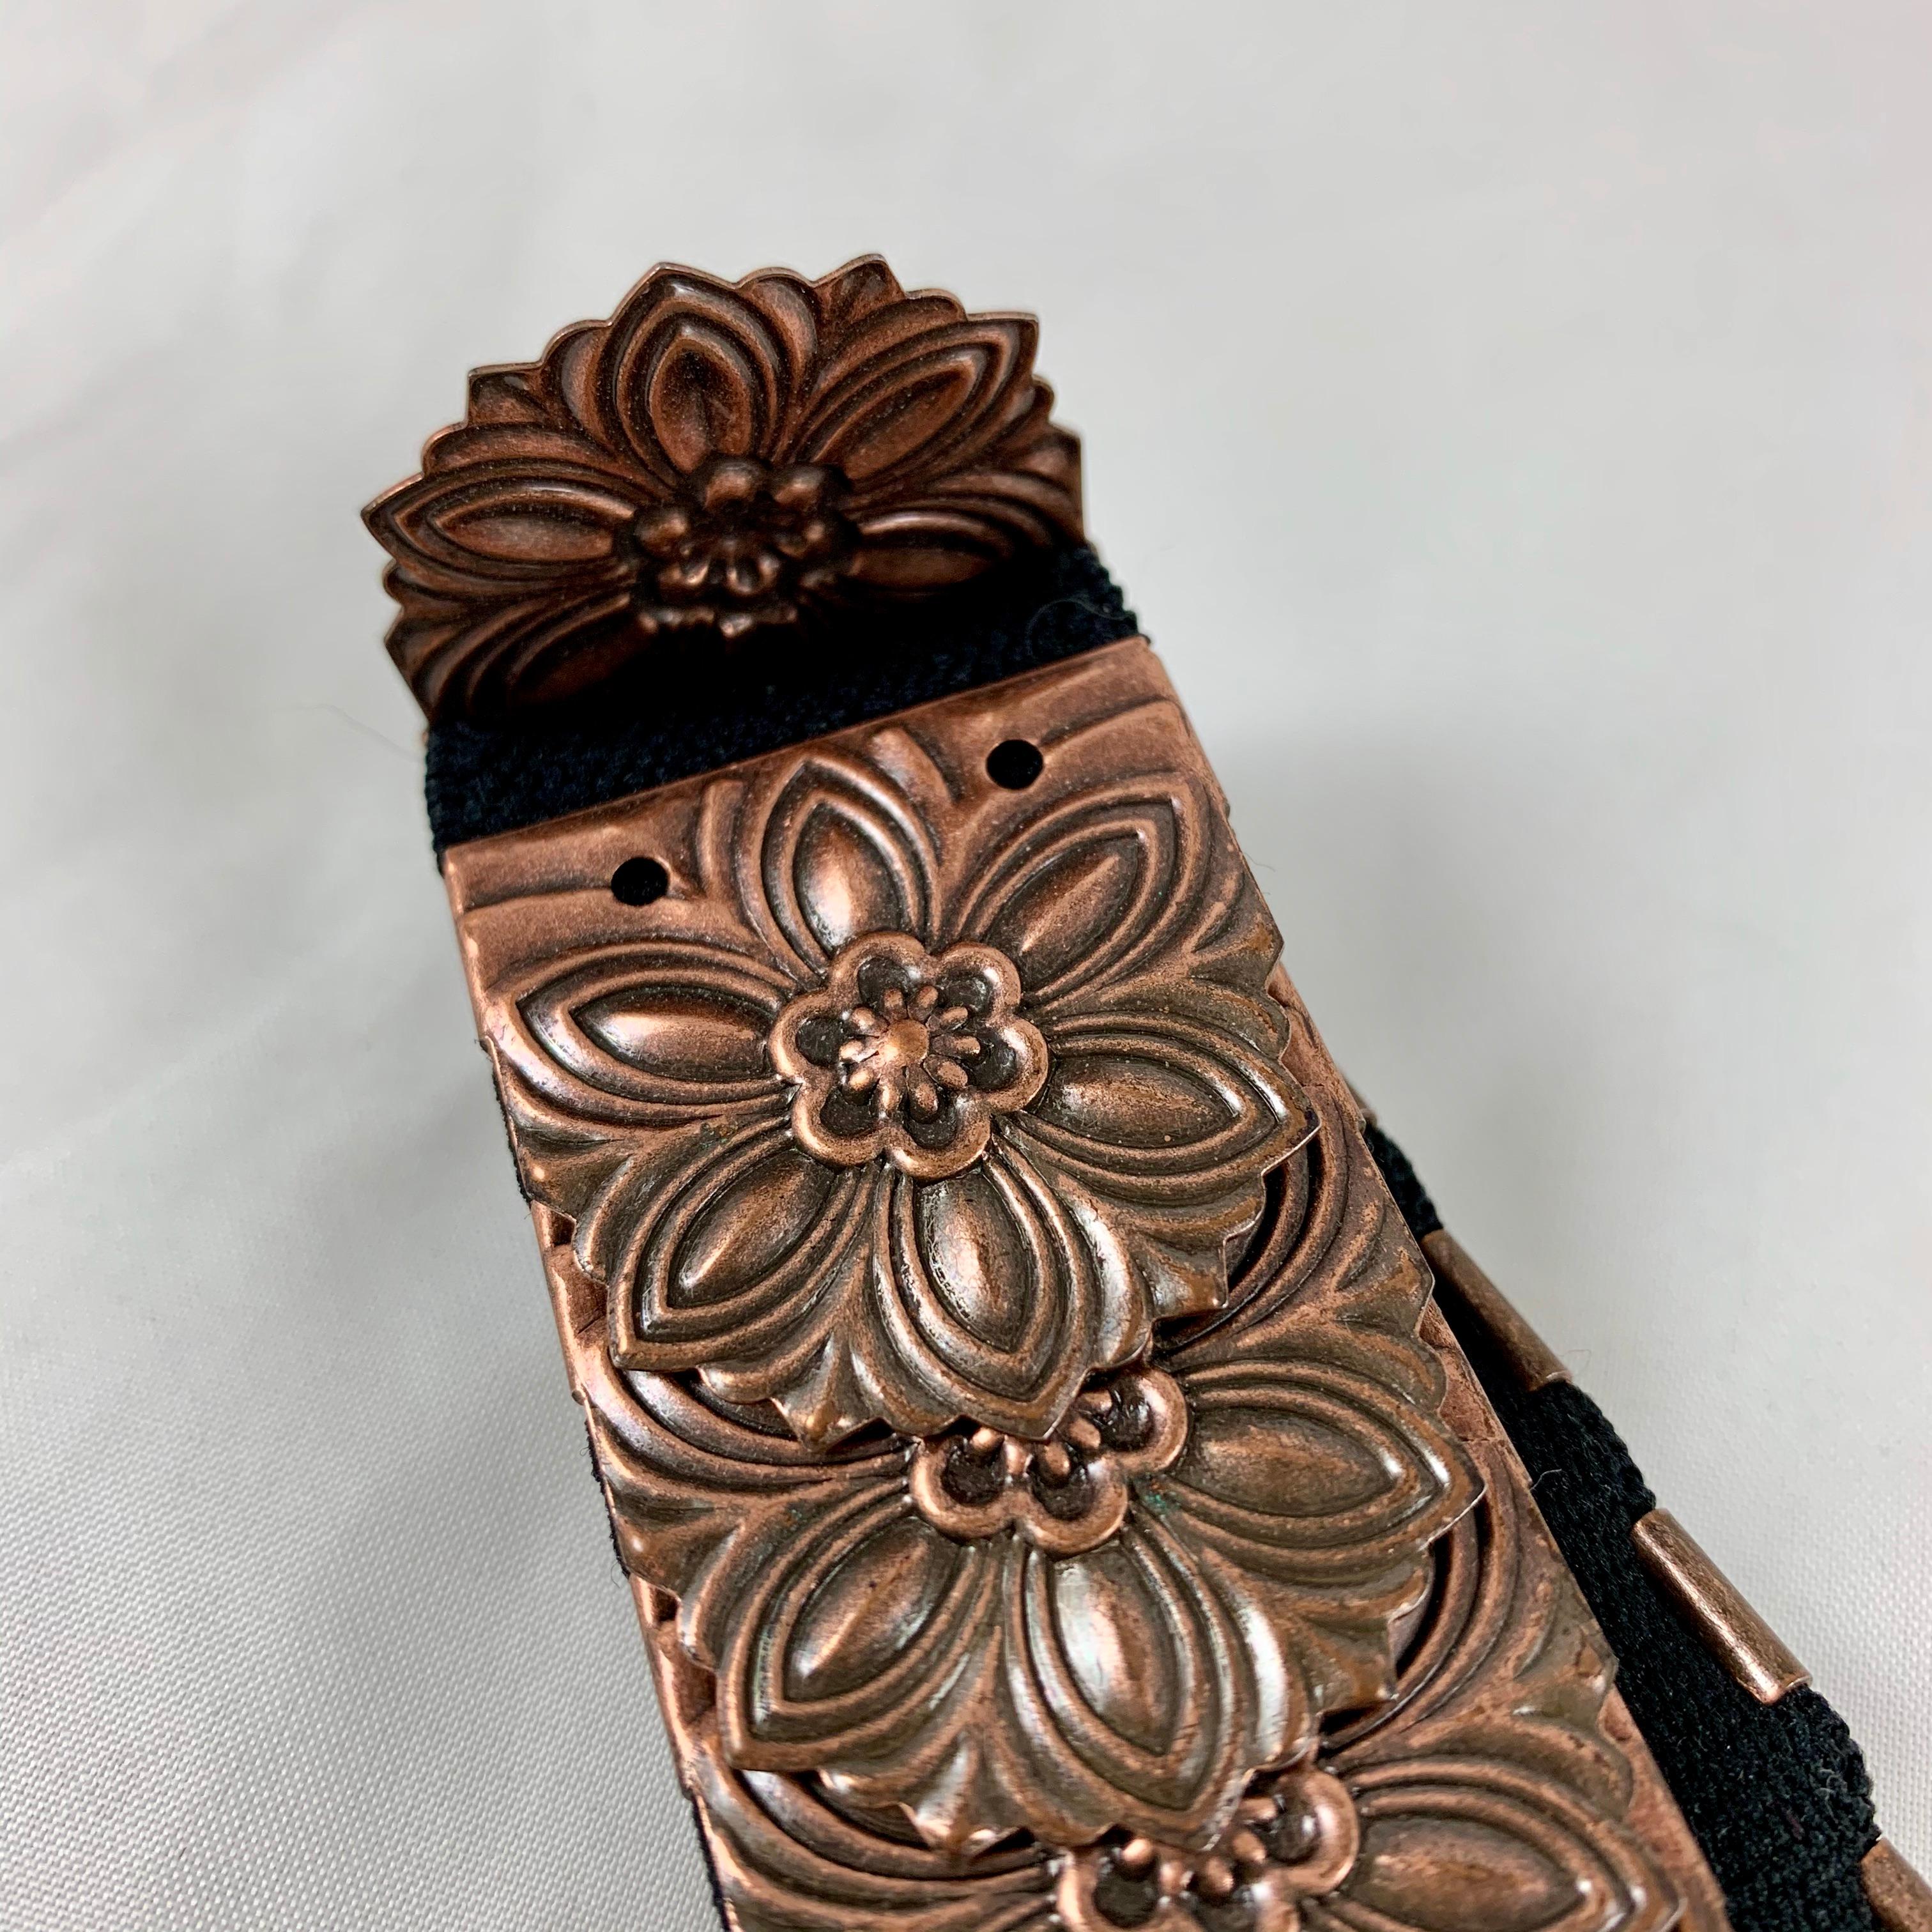 1970s Era Copper-Tone Snake Scale Metal and Crystal Jeweled Buckle Handmade Belt For Sale 10